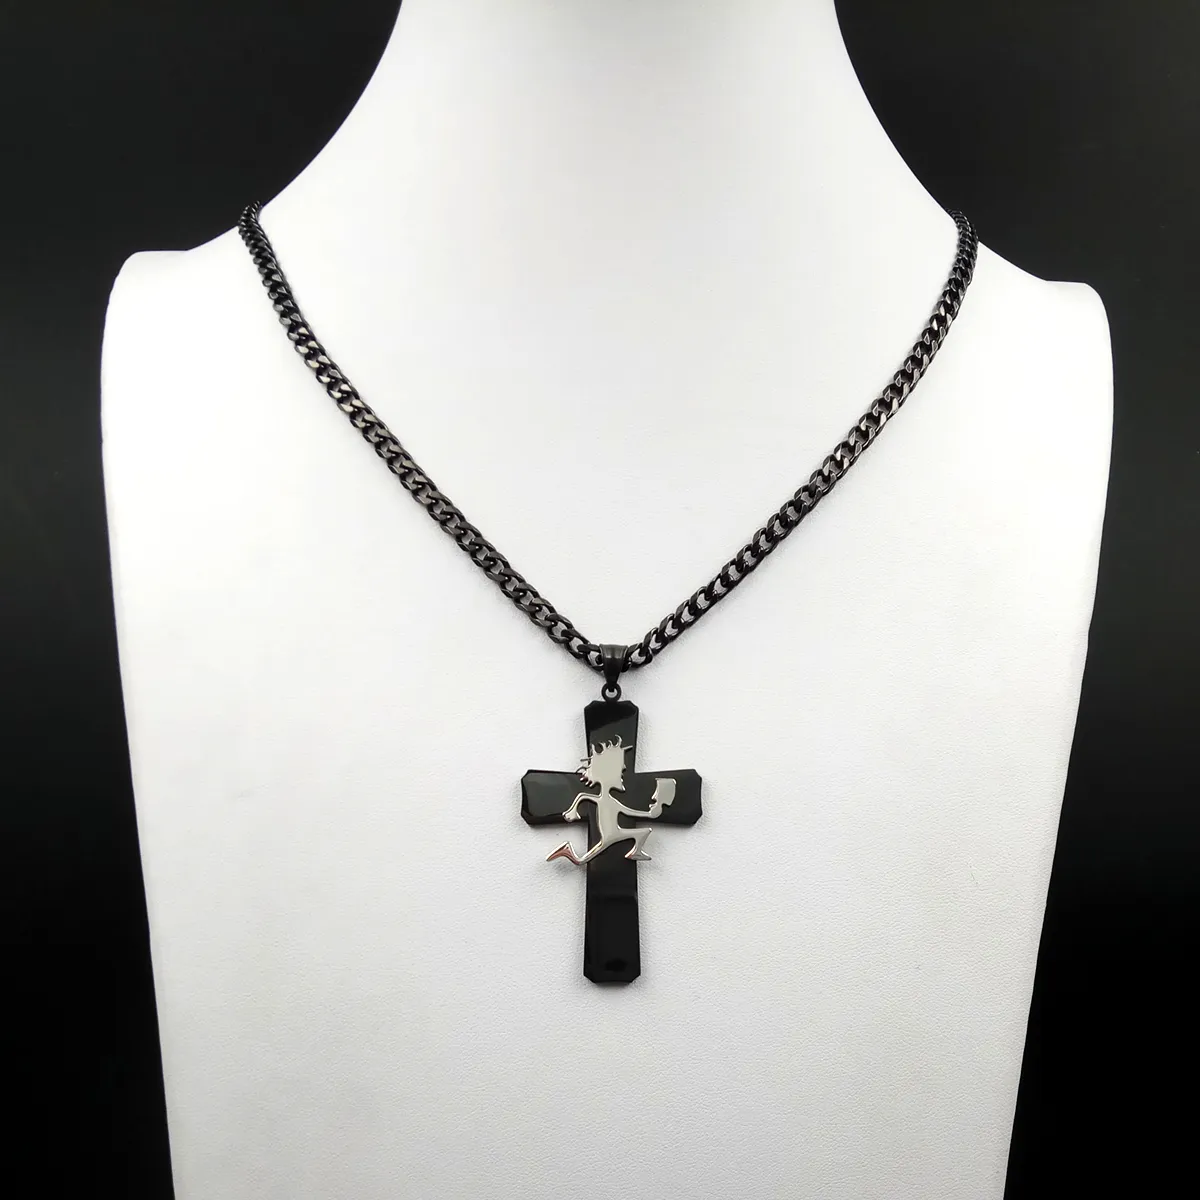 Free ship black silver ICP Jewelry Punk Stainless Steel Large cross with Hatchetman Juggalette Pendant with 5mm 24 inch curb chain Necklace